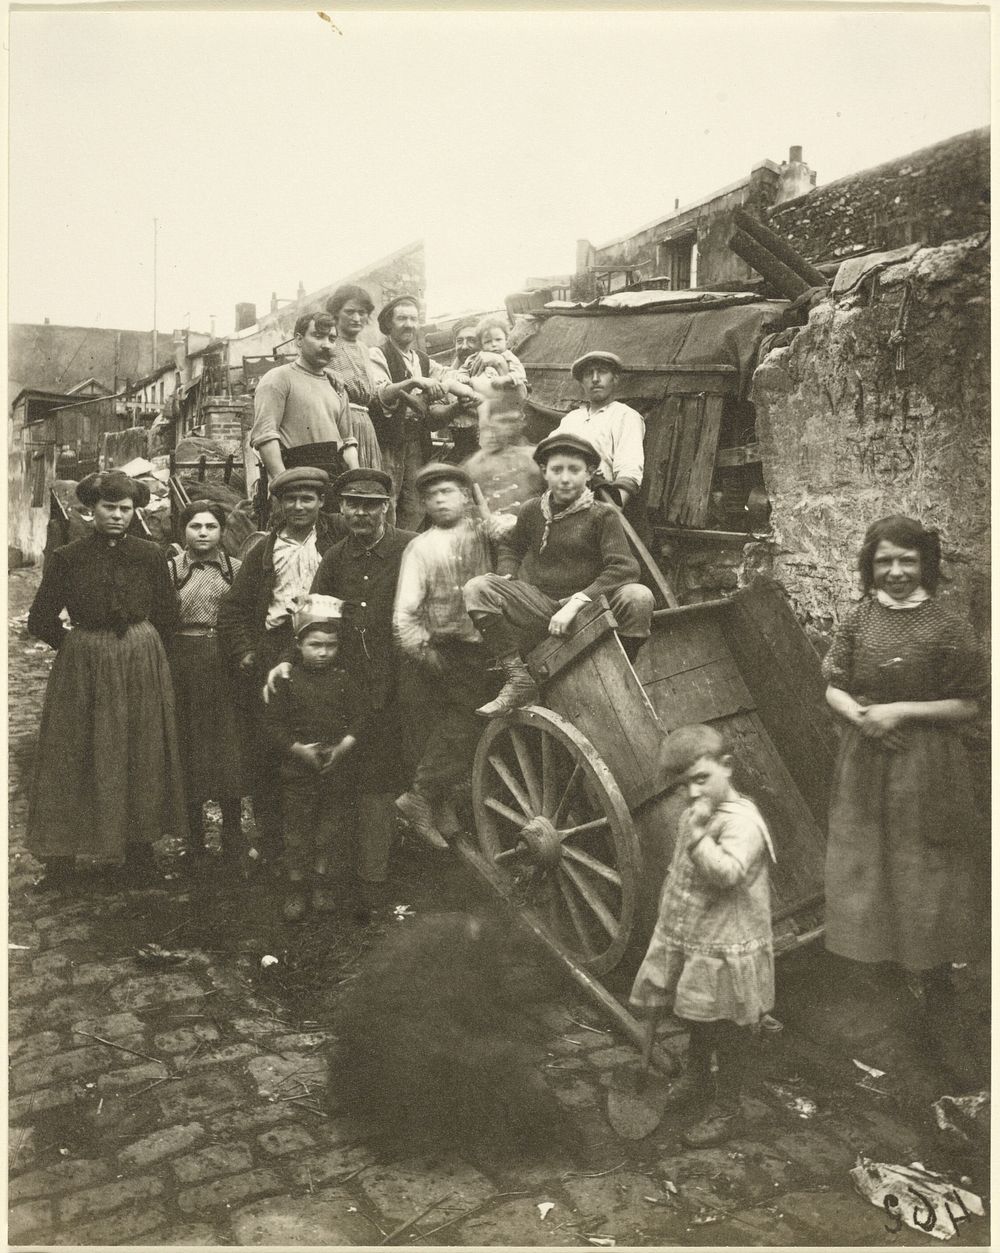 Ragpickers' Camp by Eugène Atget and Berenice Abbott